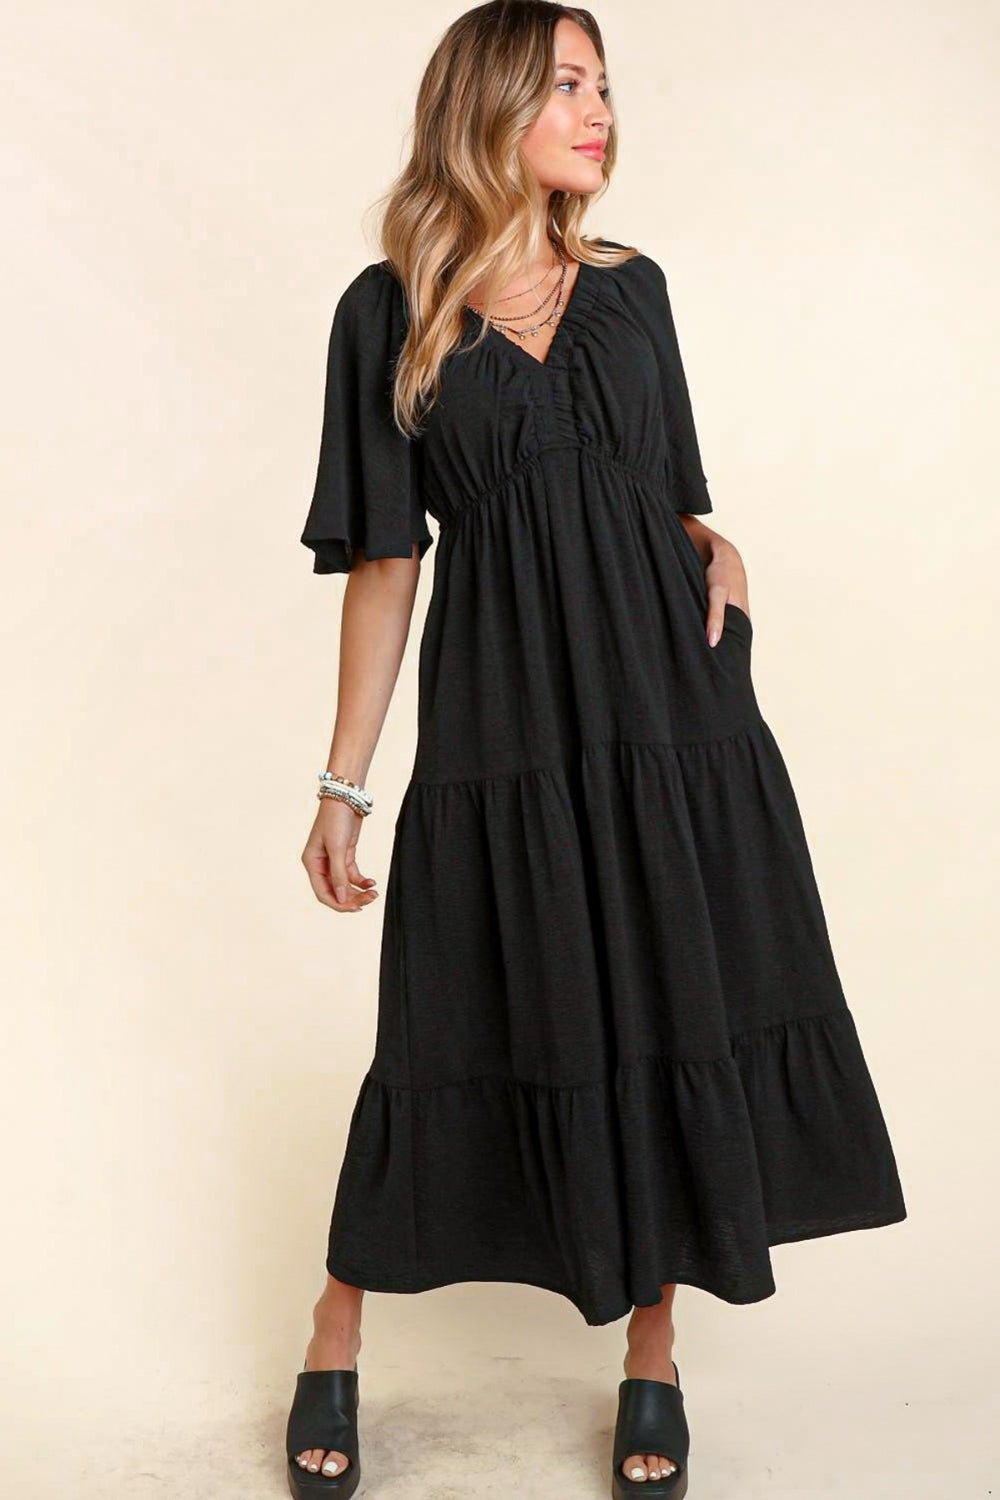 Sunset Vacation Tiered Babydoll Maxi Dress with Side Pocket Sunset and Swim Black S 